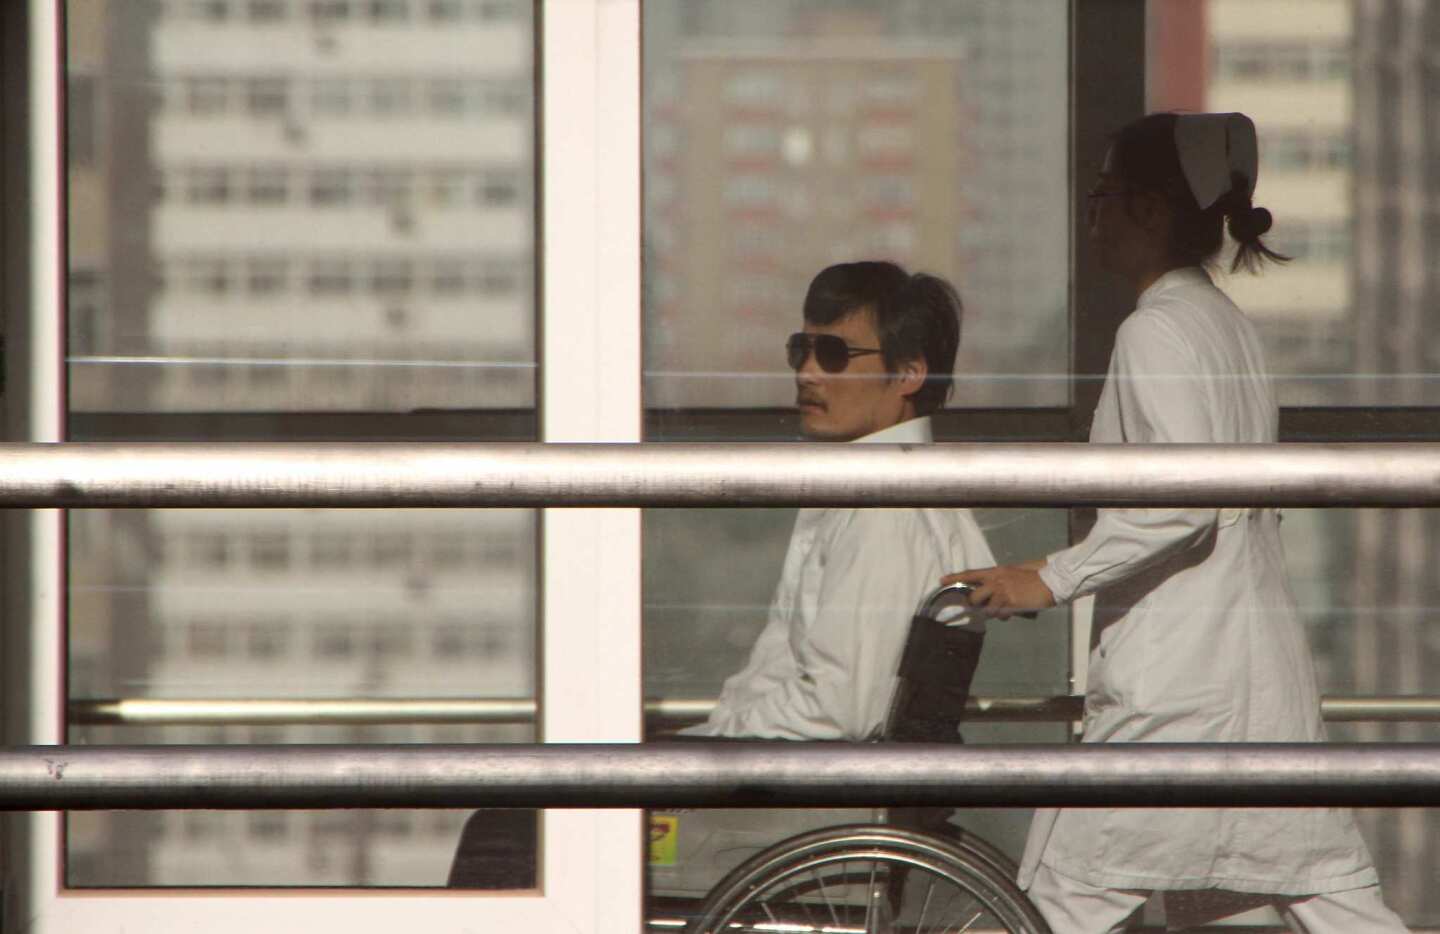 Chinese activist Chen Guangcheng is transported by a nurse at the Chaoyang Hospital in Beijing.